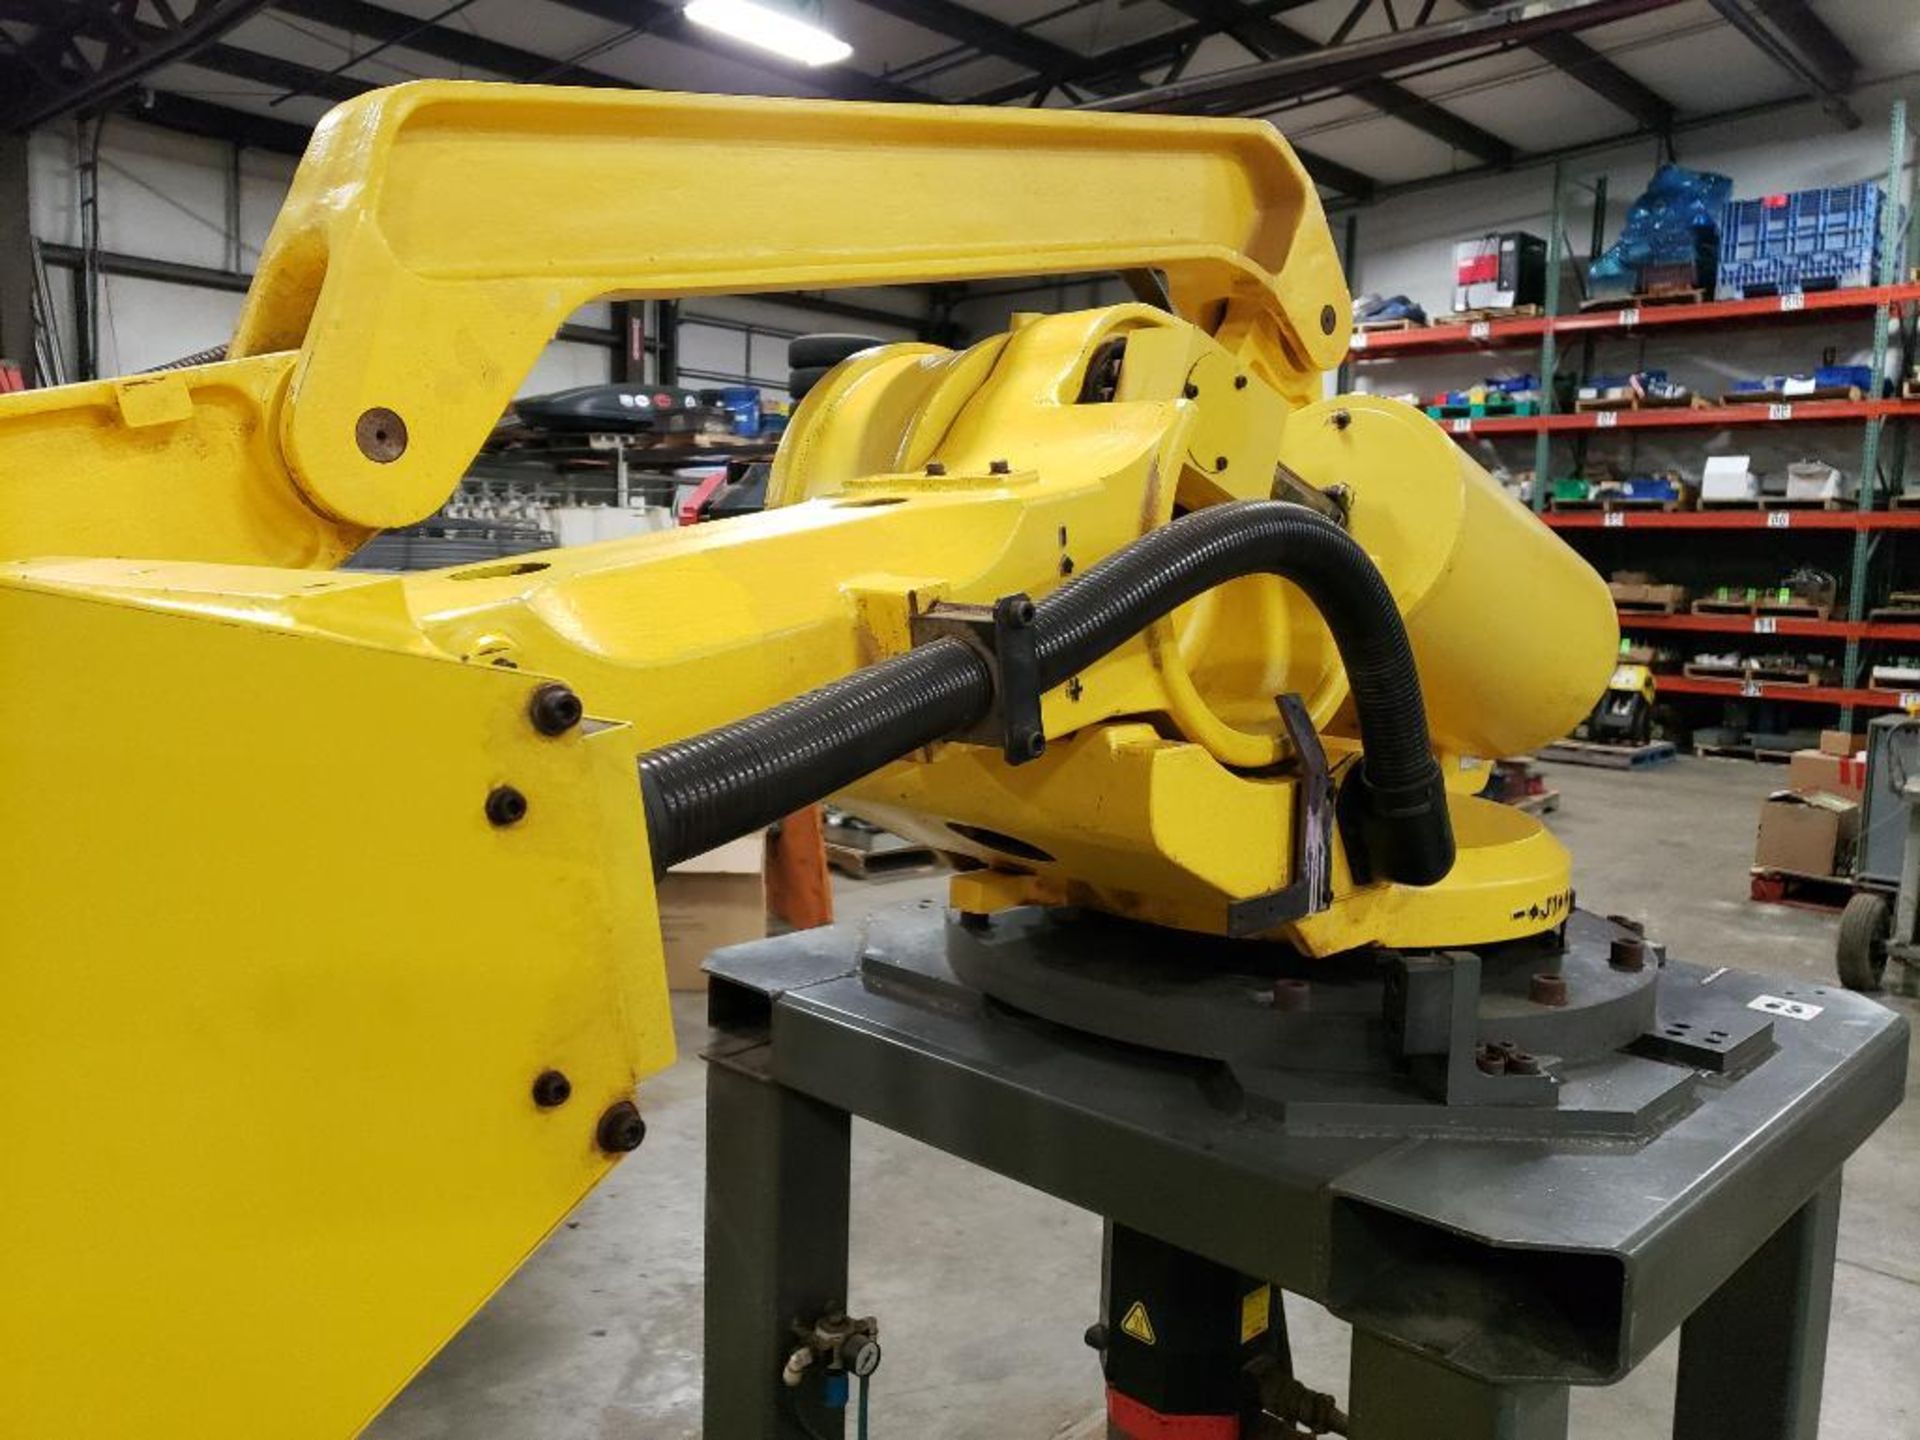 Fanuc M-410i HW robot arm. Does not include controller or cables. (cables have been cut) - Image 25 of 27